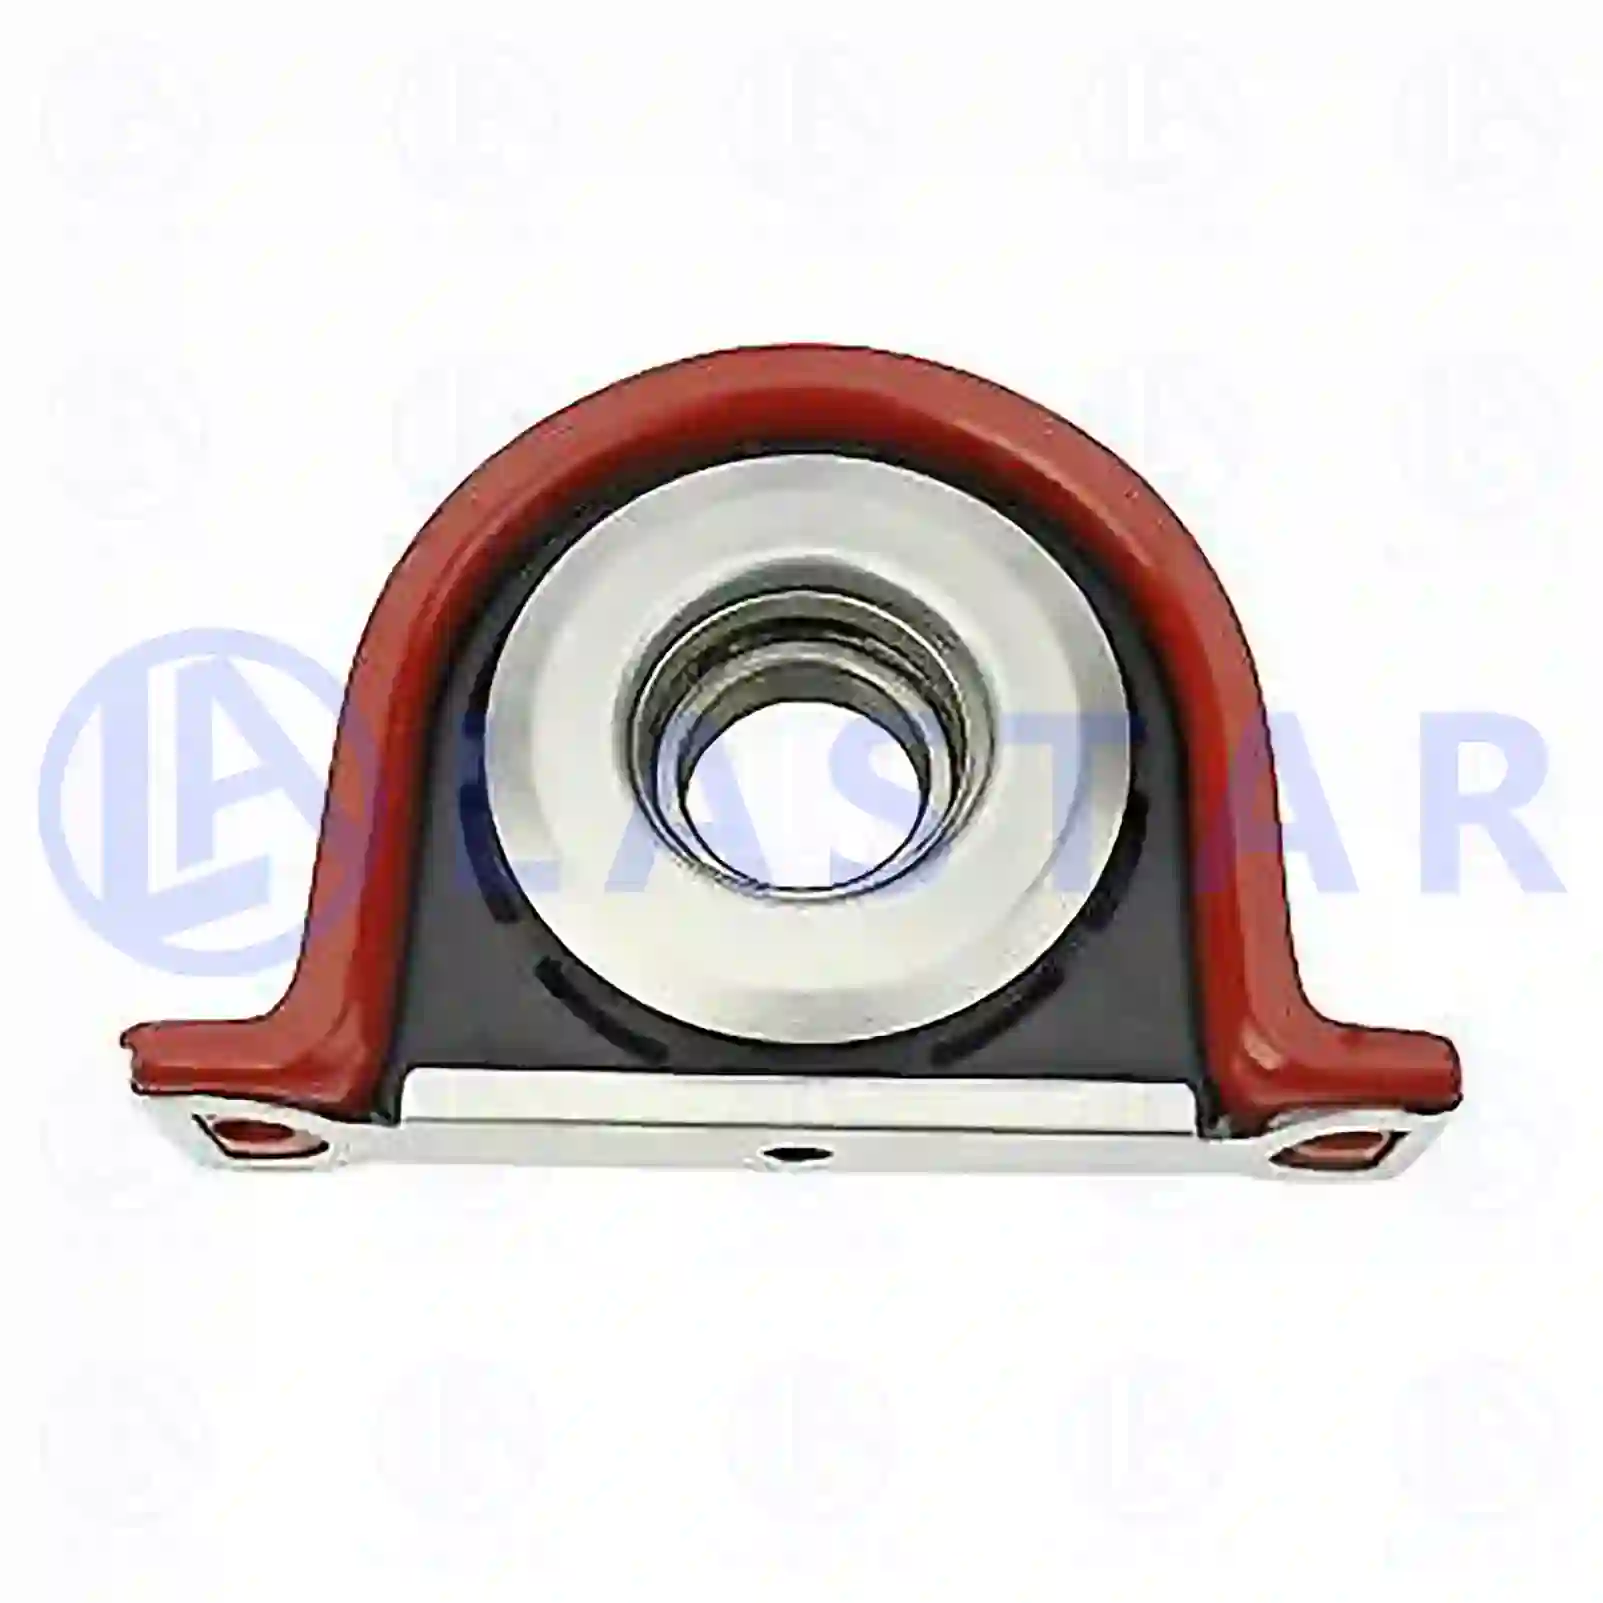 Center bearing, 77734322, 5000821936 ||  77734322 Lastar Spare Part | Truck Spare Parts, Auotomotive Spare Parts Center bearing, 77734322, 5000821936 ||  77734322 Lastar Spare Part | Truck Spare Parts, Auotomotive Spare Parts